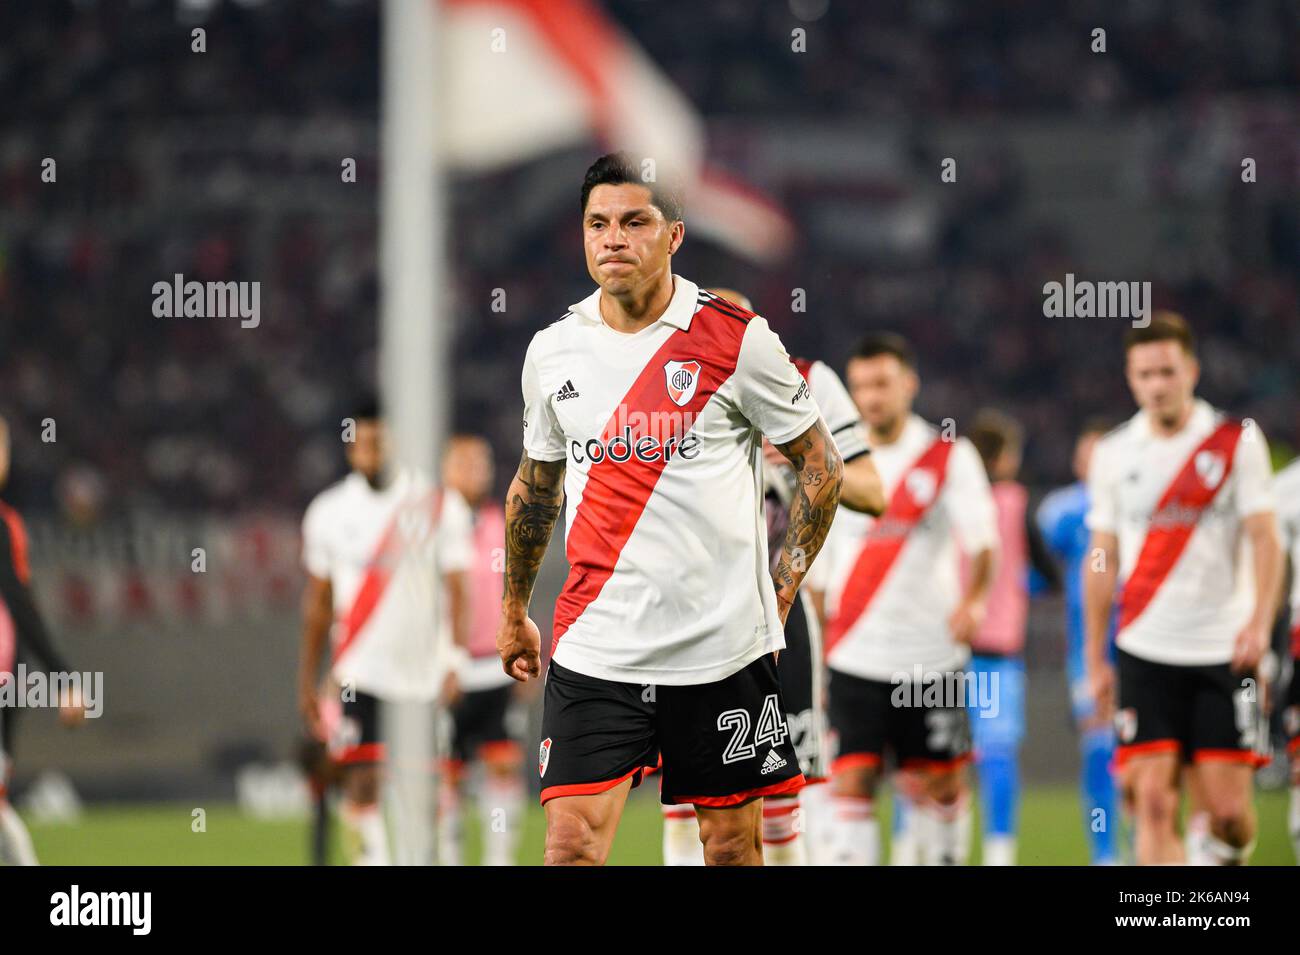 Buenos Aires, Argentina. 13th Oct, 2022. Enzo Perez of River Plate seen during the Liga Profesional 2022 match between River Plate and Platense at Estadio Monumental Antonio Vespucio Liberti. Final score; River Plate 2:1 Platense. Credit: SOPA Images Limited/Alamy Live News Stock Photo